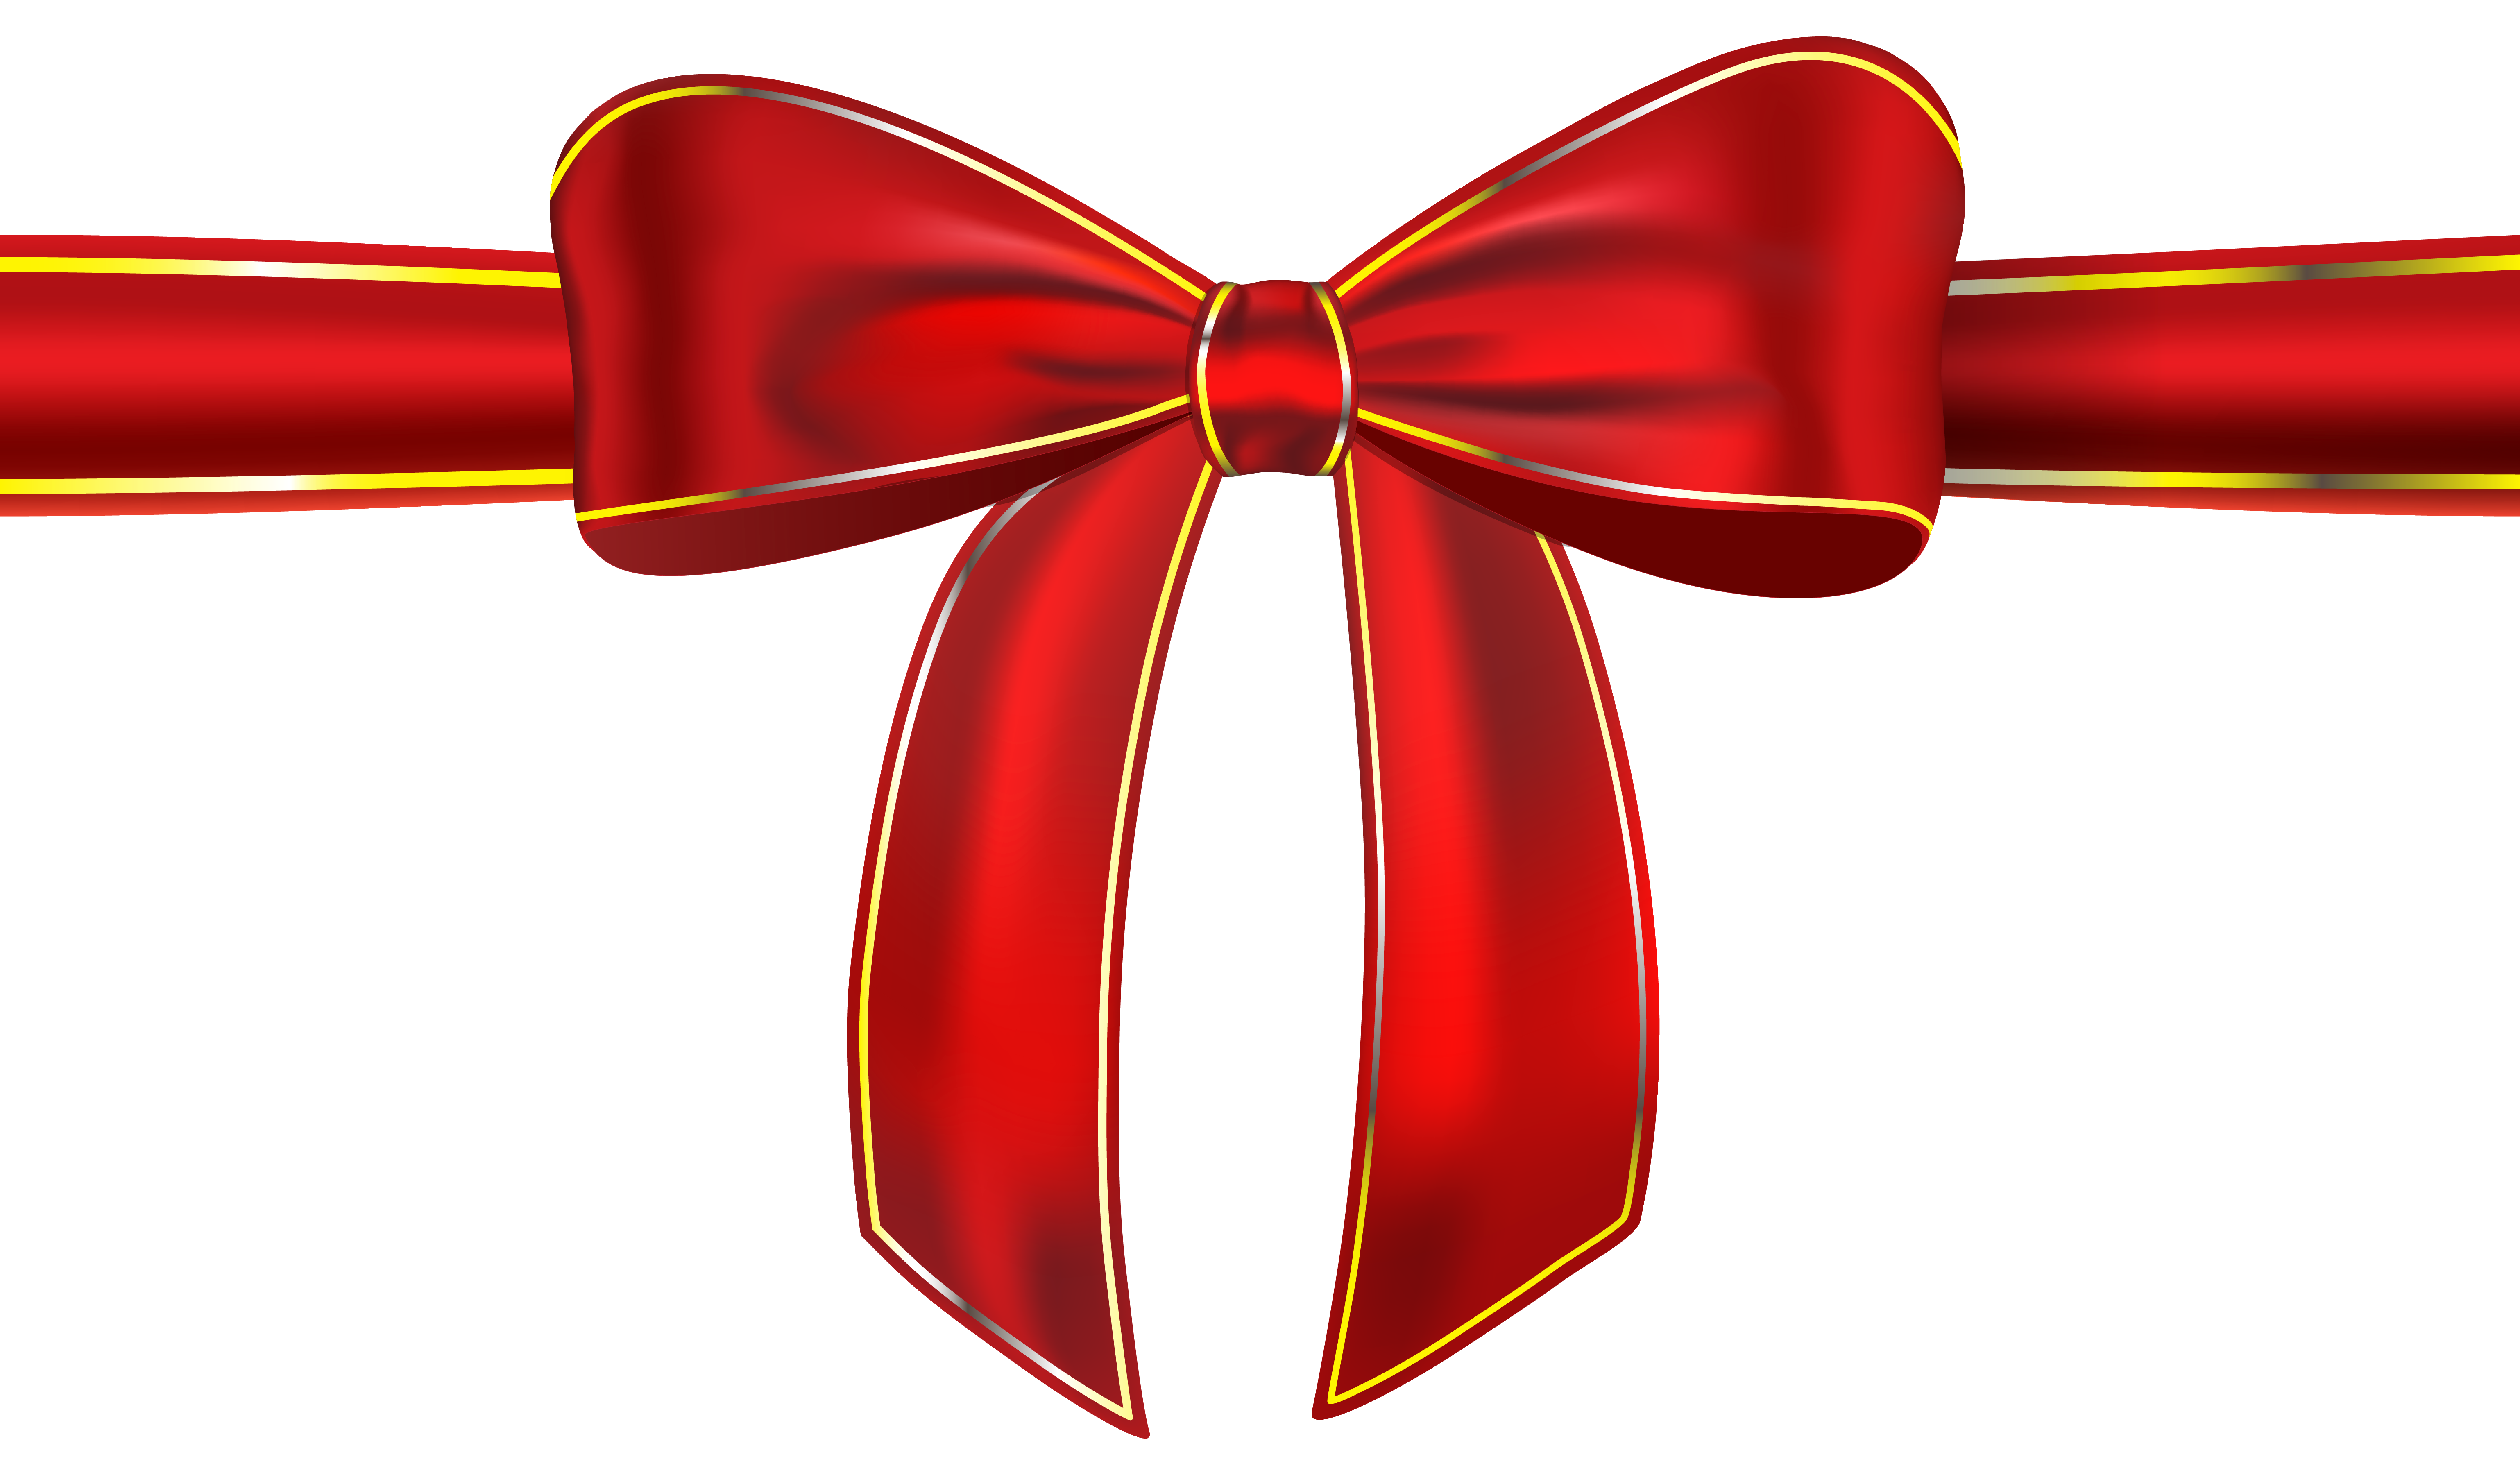 Red ribbon Satin Clip art bow png download 6152*3601 Free